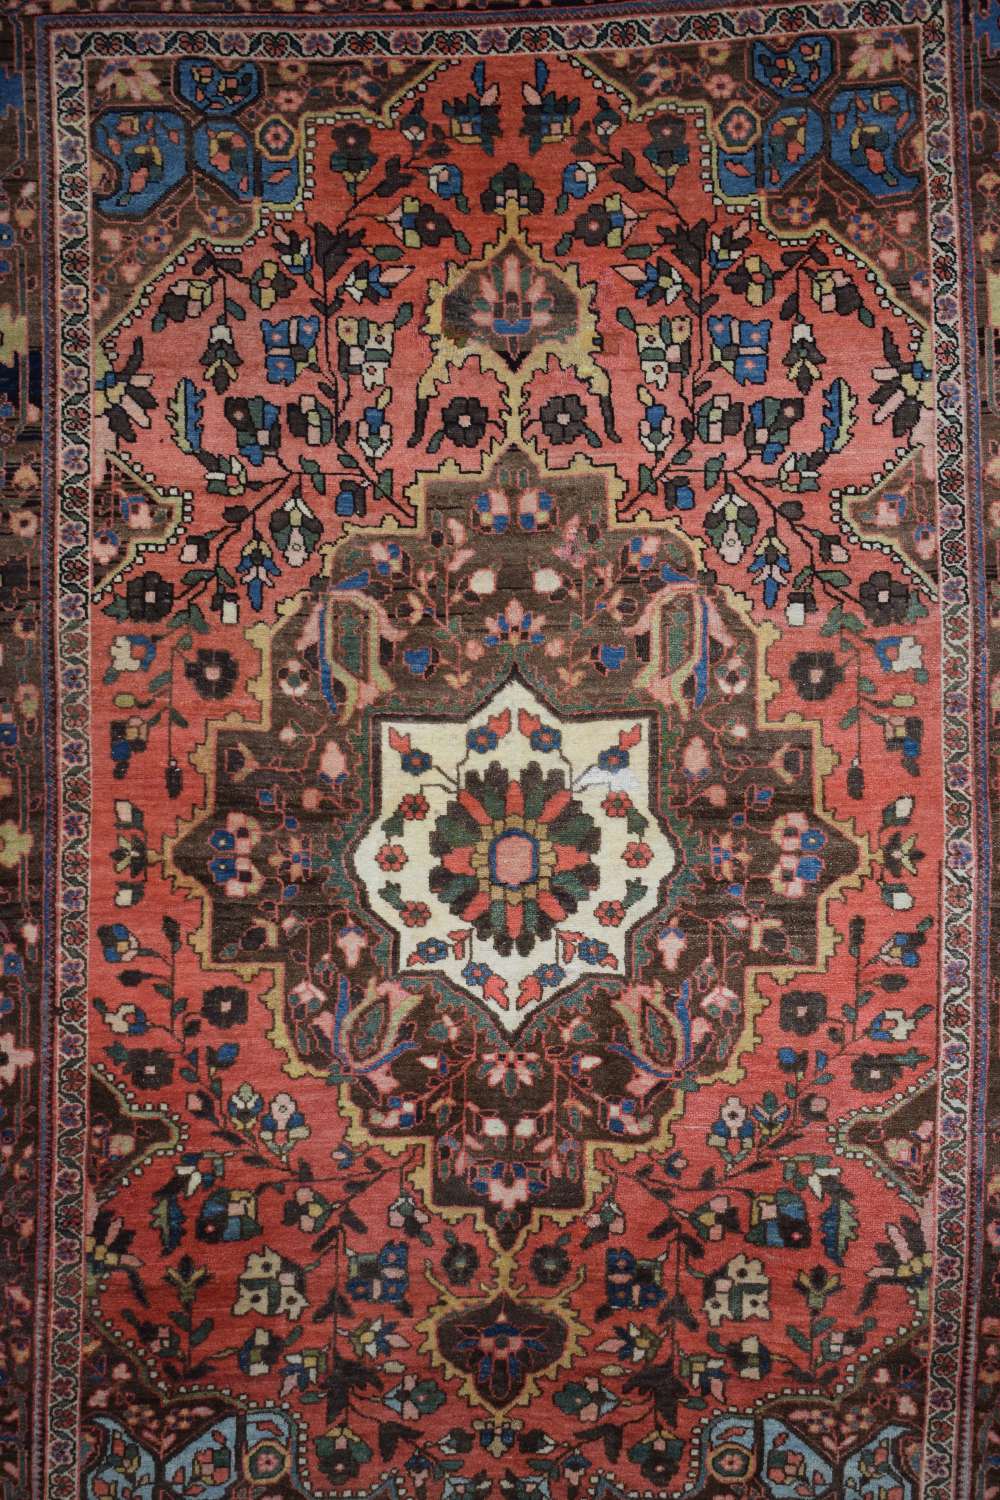 Saruk rug, north west Persia, circa 1930s-40s, 6ft. 8in. X 4ft. 8in. 2.03m. X 1.42m. Slight loss - Image 9 of 10